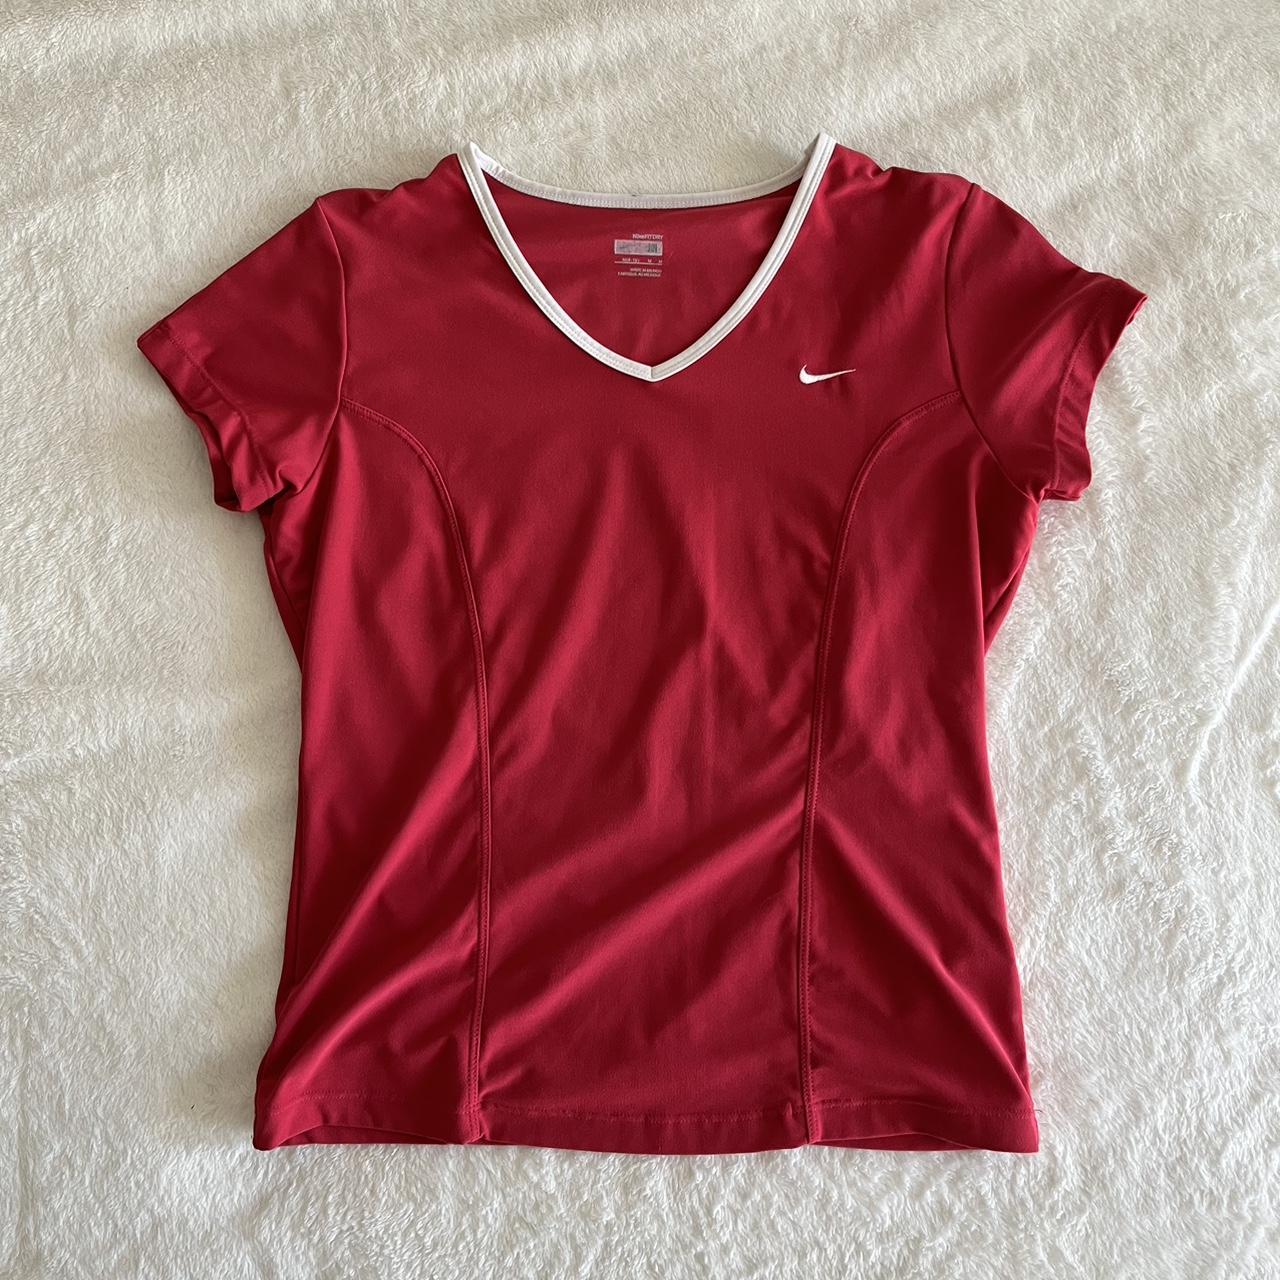 Nike Women's Red and Pink Shirt | Depop